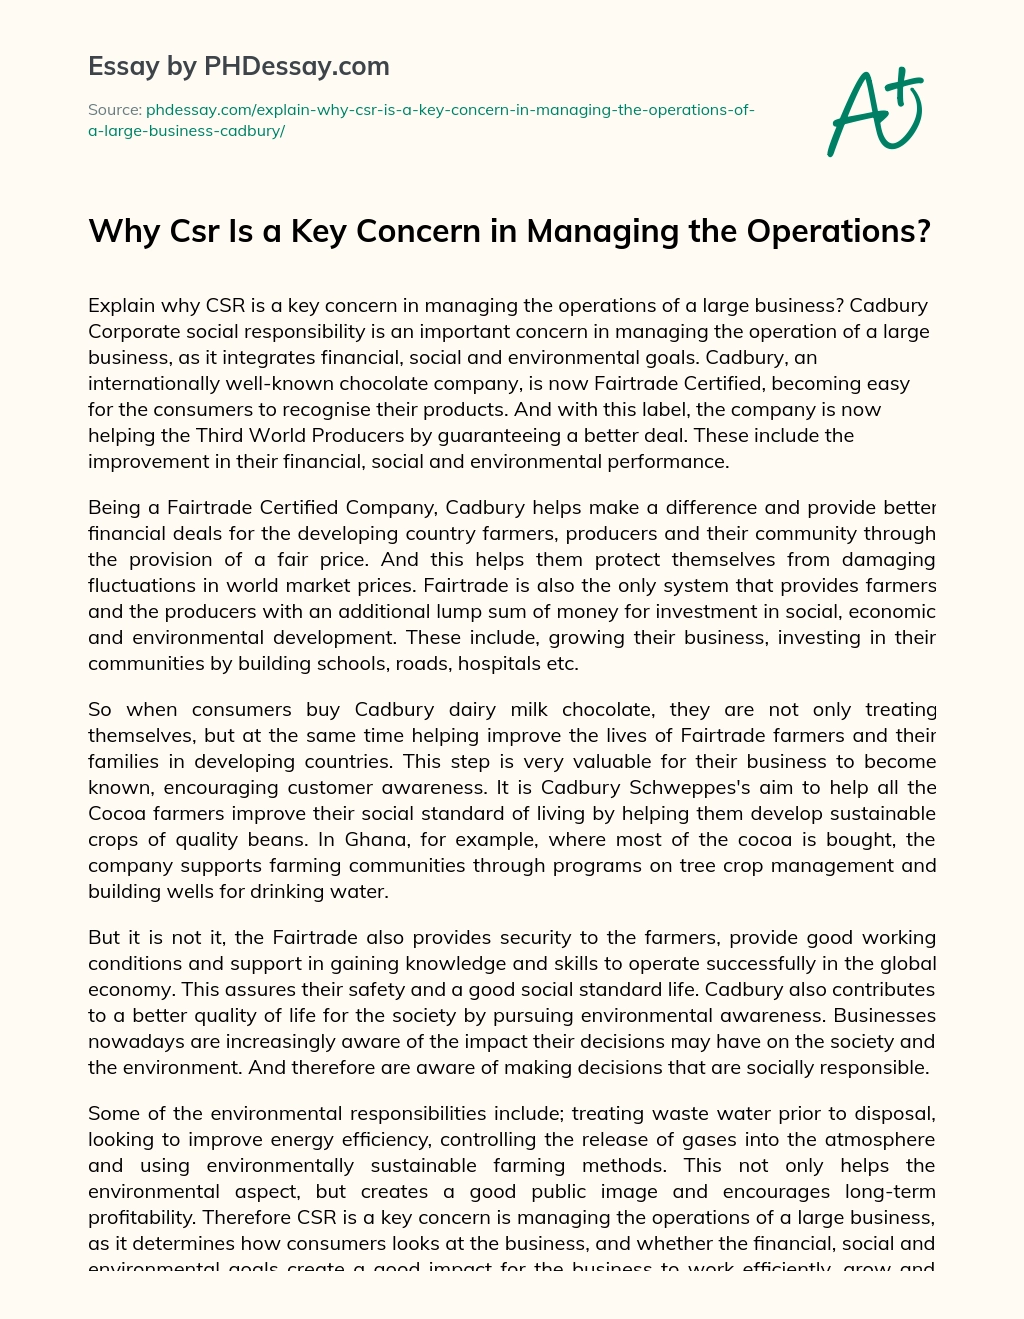 Why Csr Is a Key Concern in Managing the Operations? essay